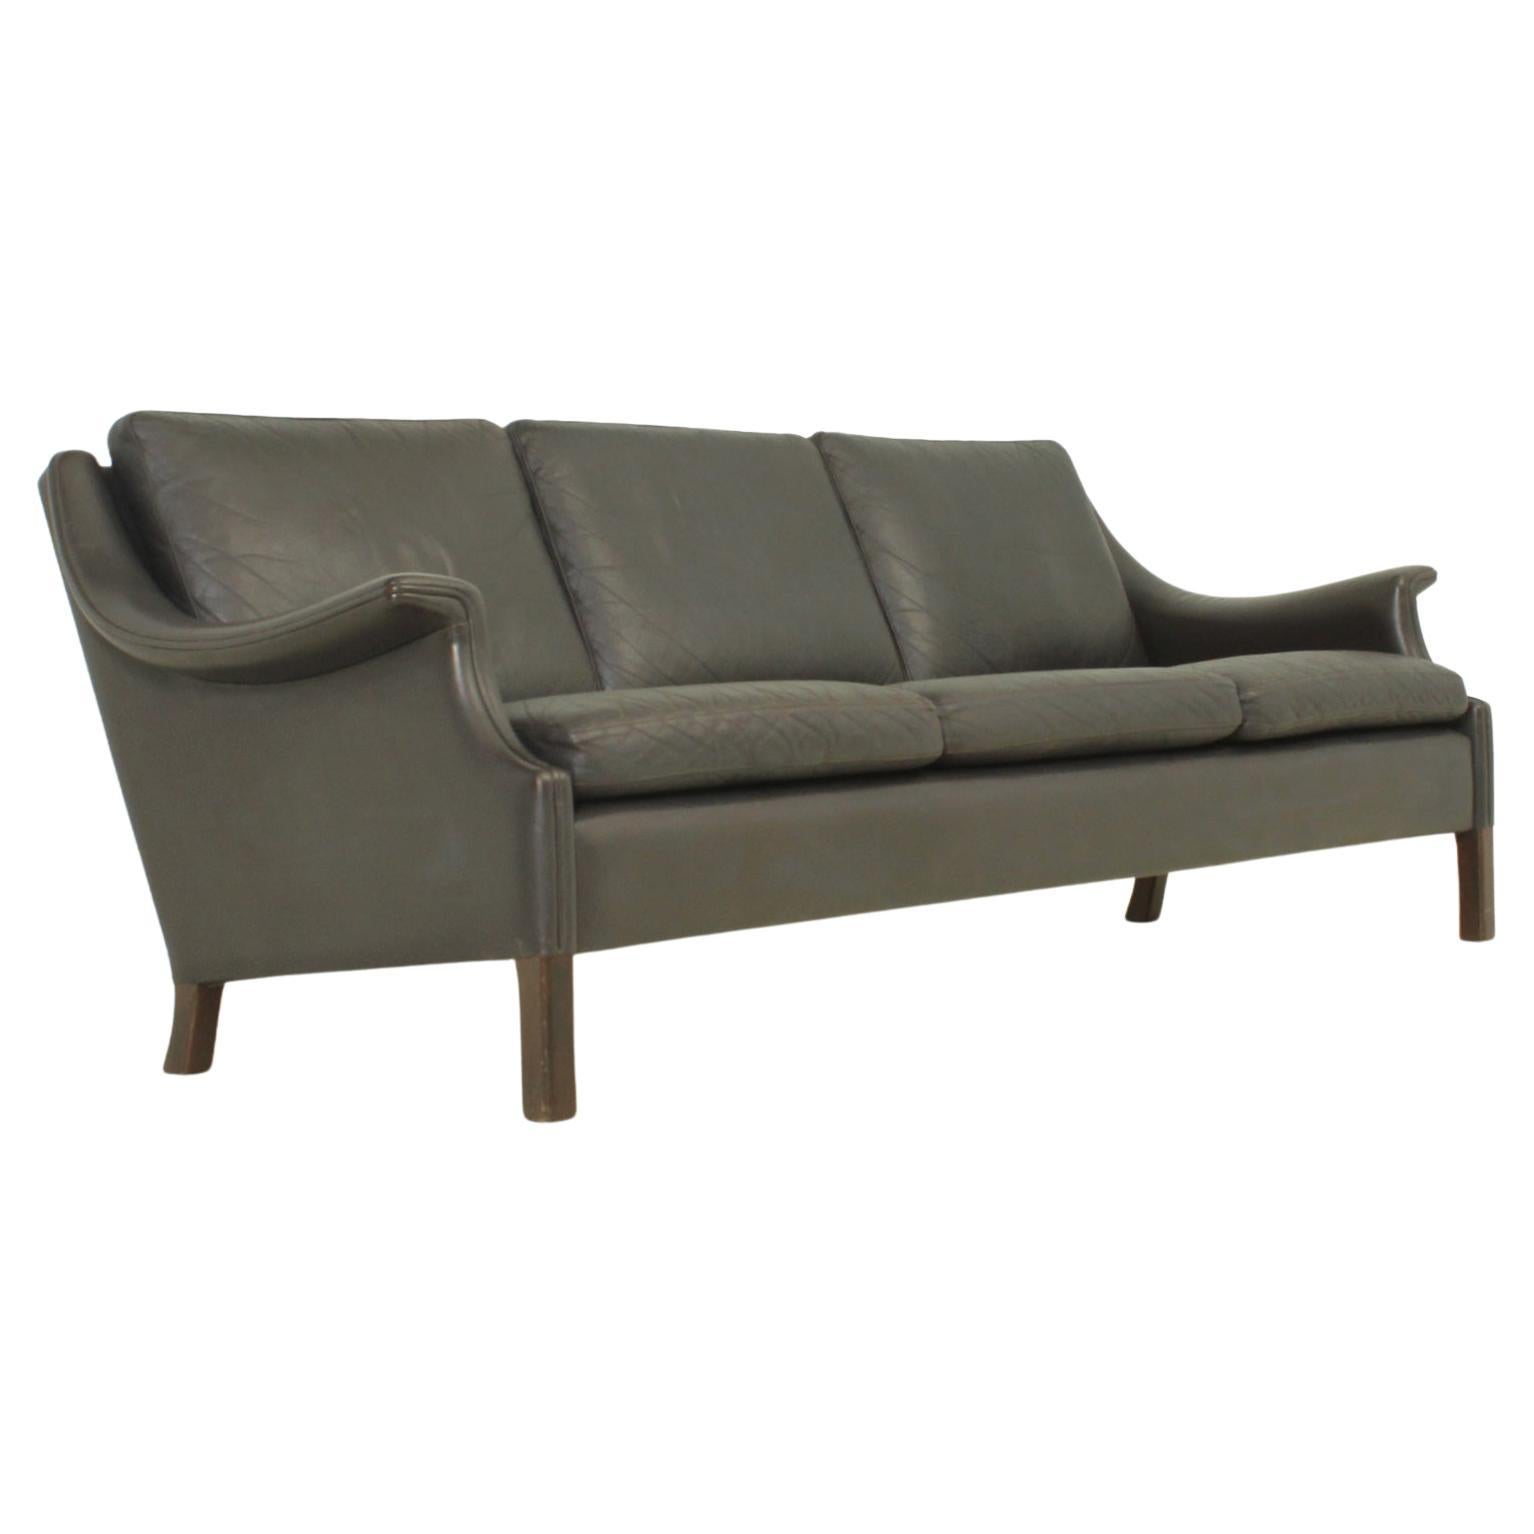 Aage Christiansen Three-Seater Sofa in Dark Brown Leather For Sale